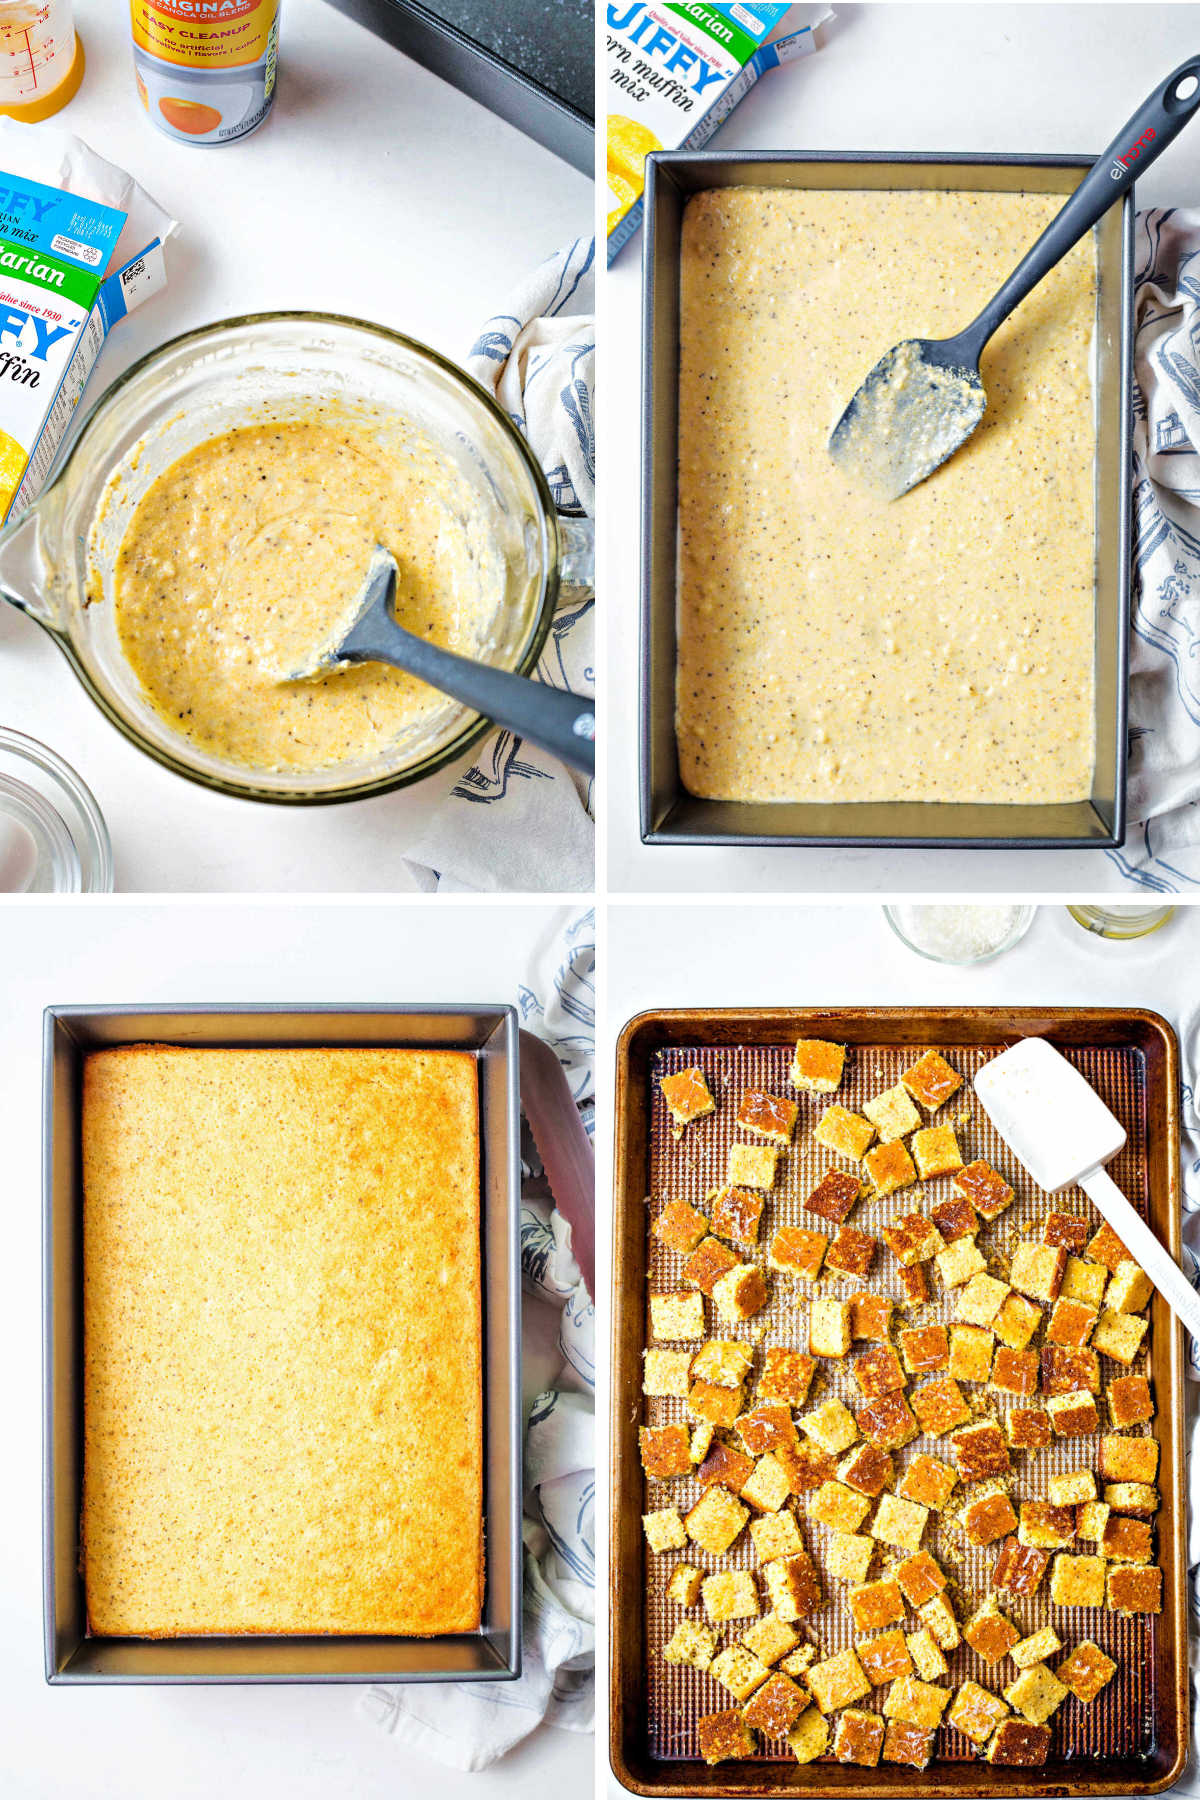 process steps for making parmesan cornbread croutons: mix up batter; spread in pan; bake; cut into squares.